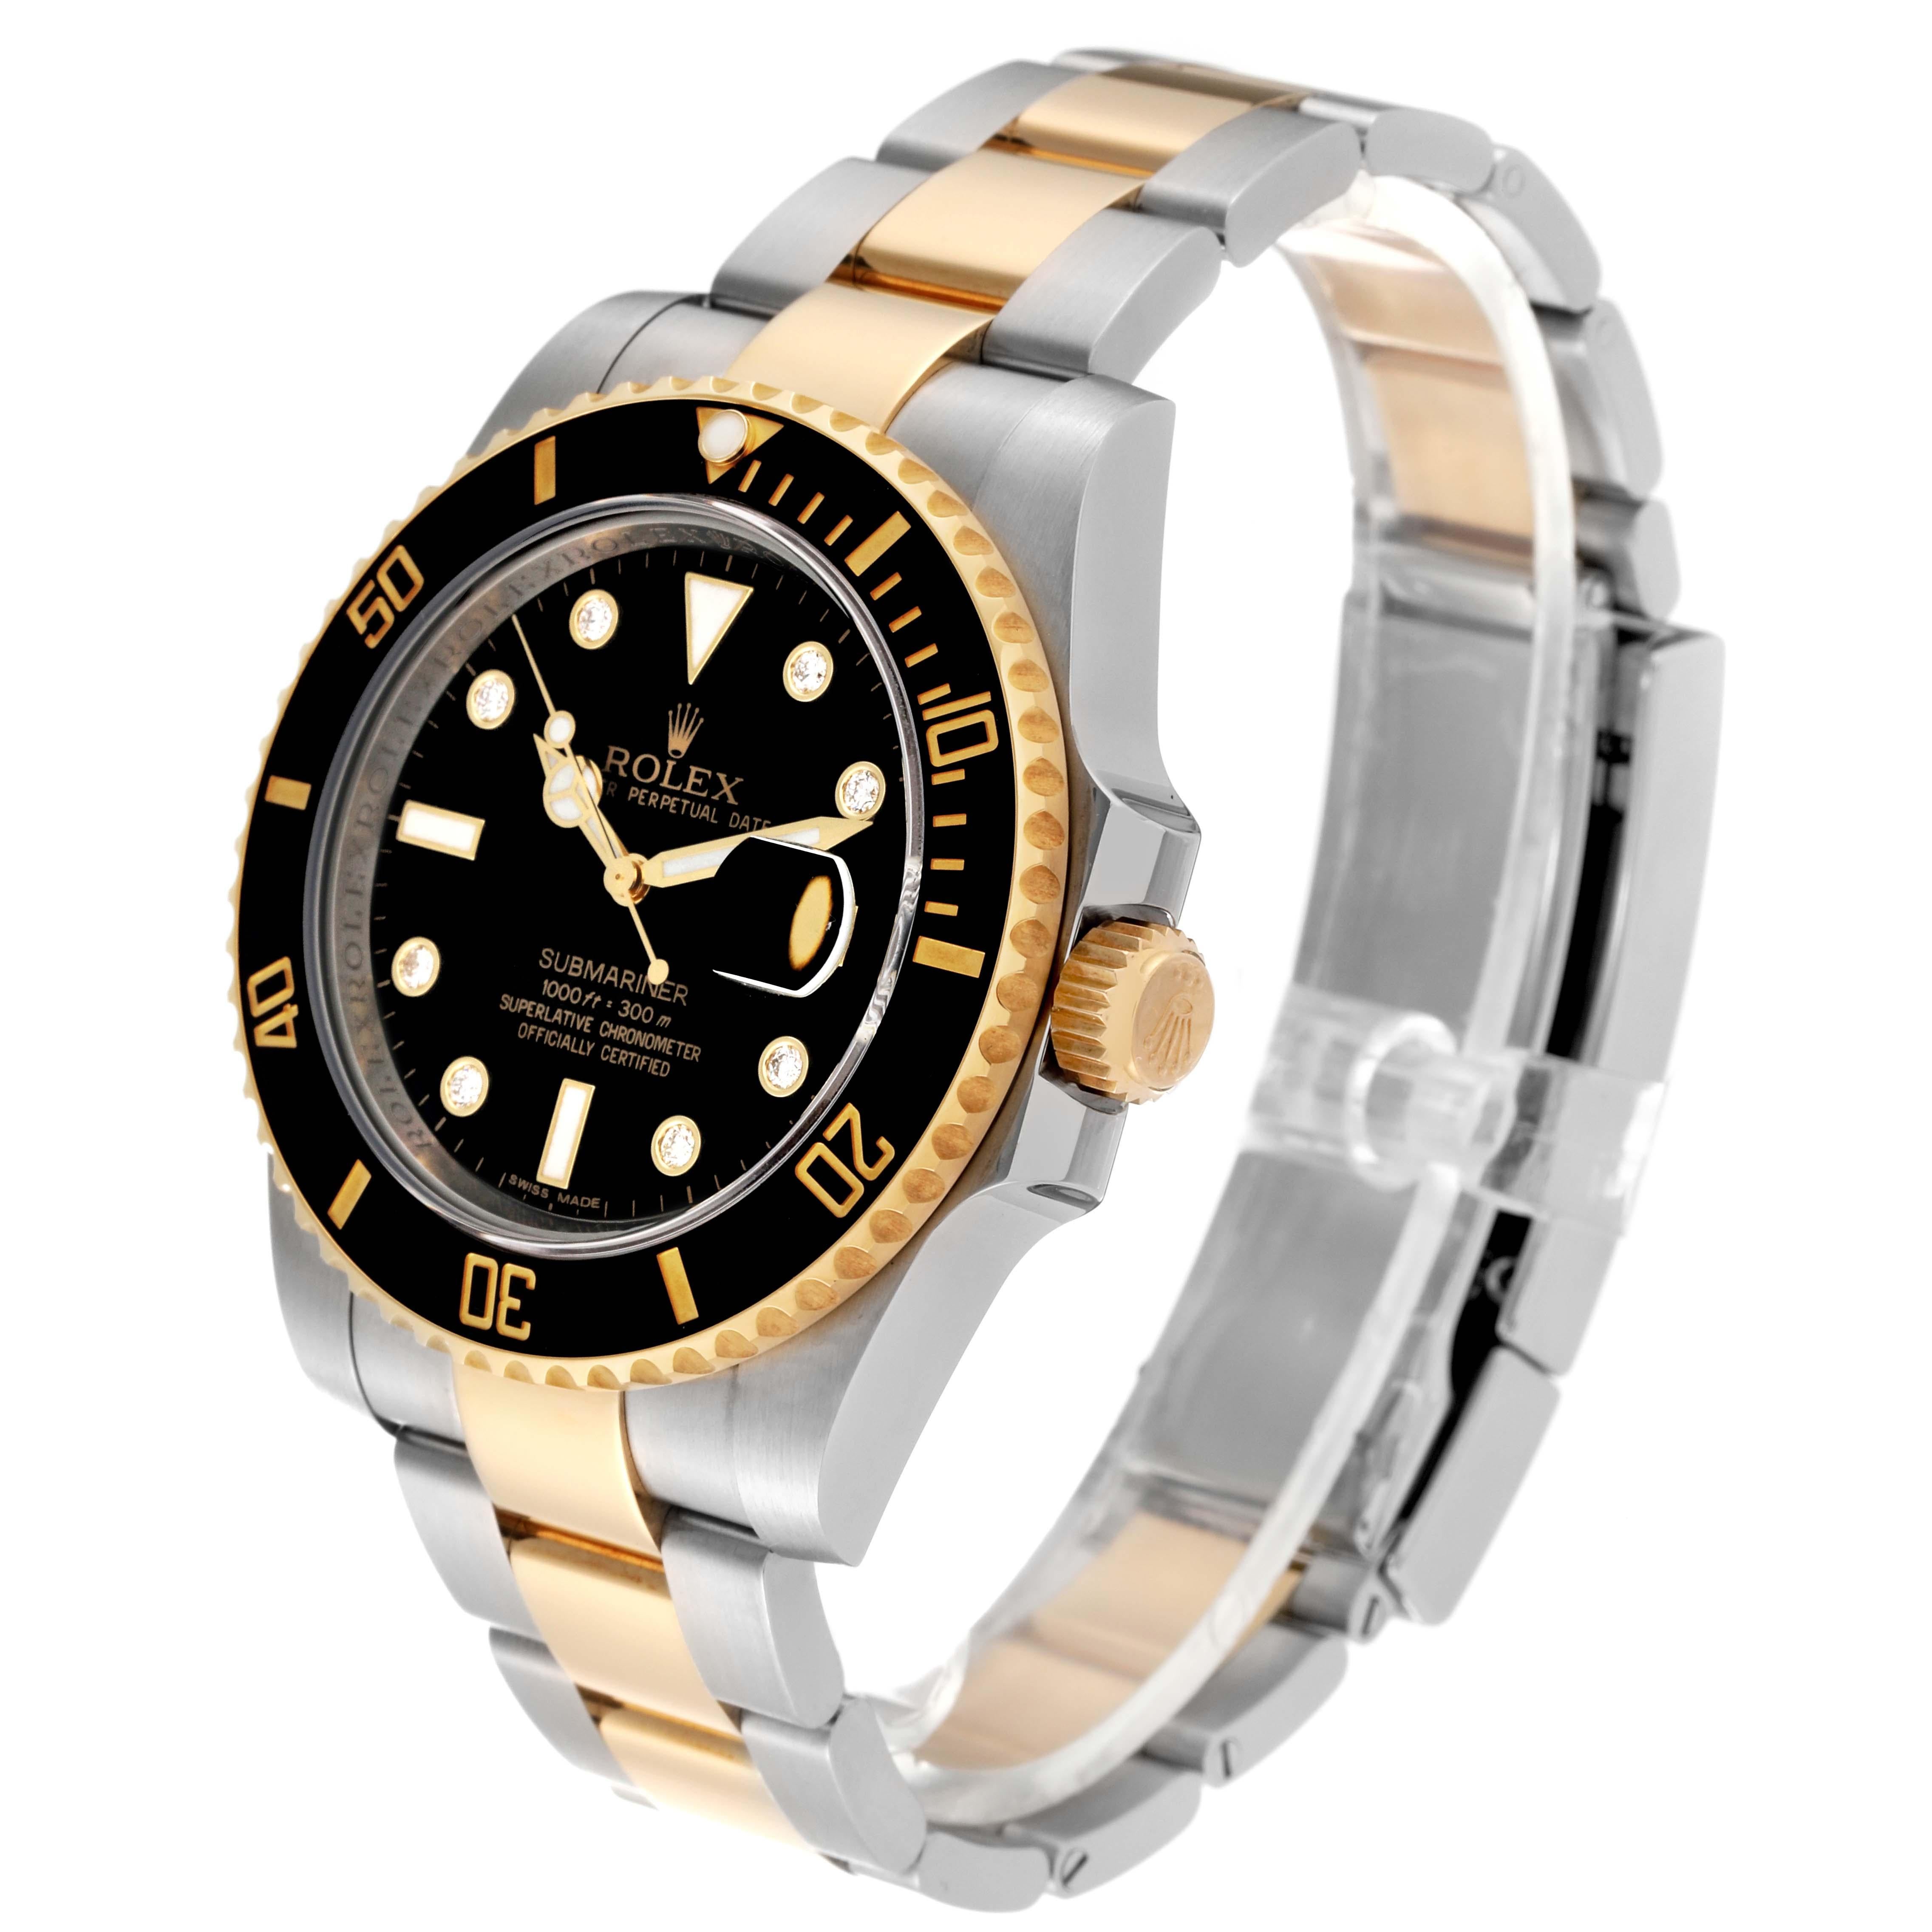 Rolex Submariner Steel Yellow Gold Black Diamond Dial Mens Watch 116613 For Sale 2